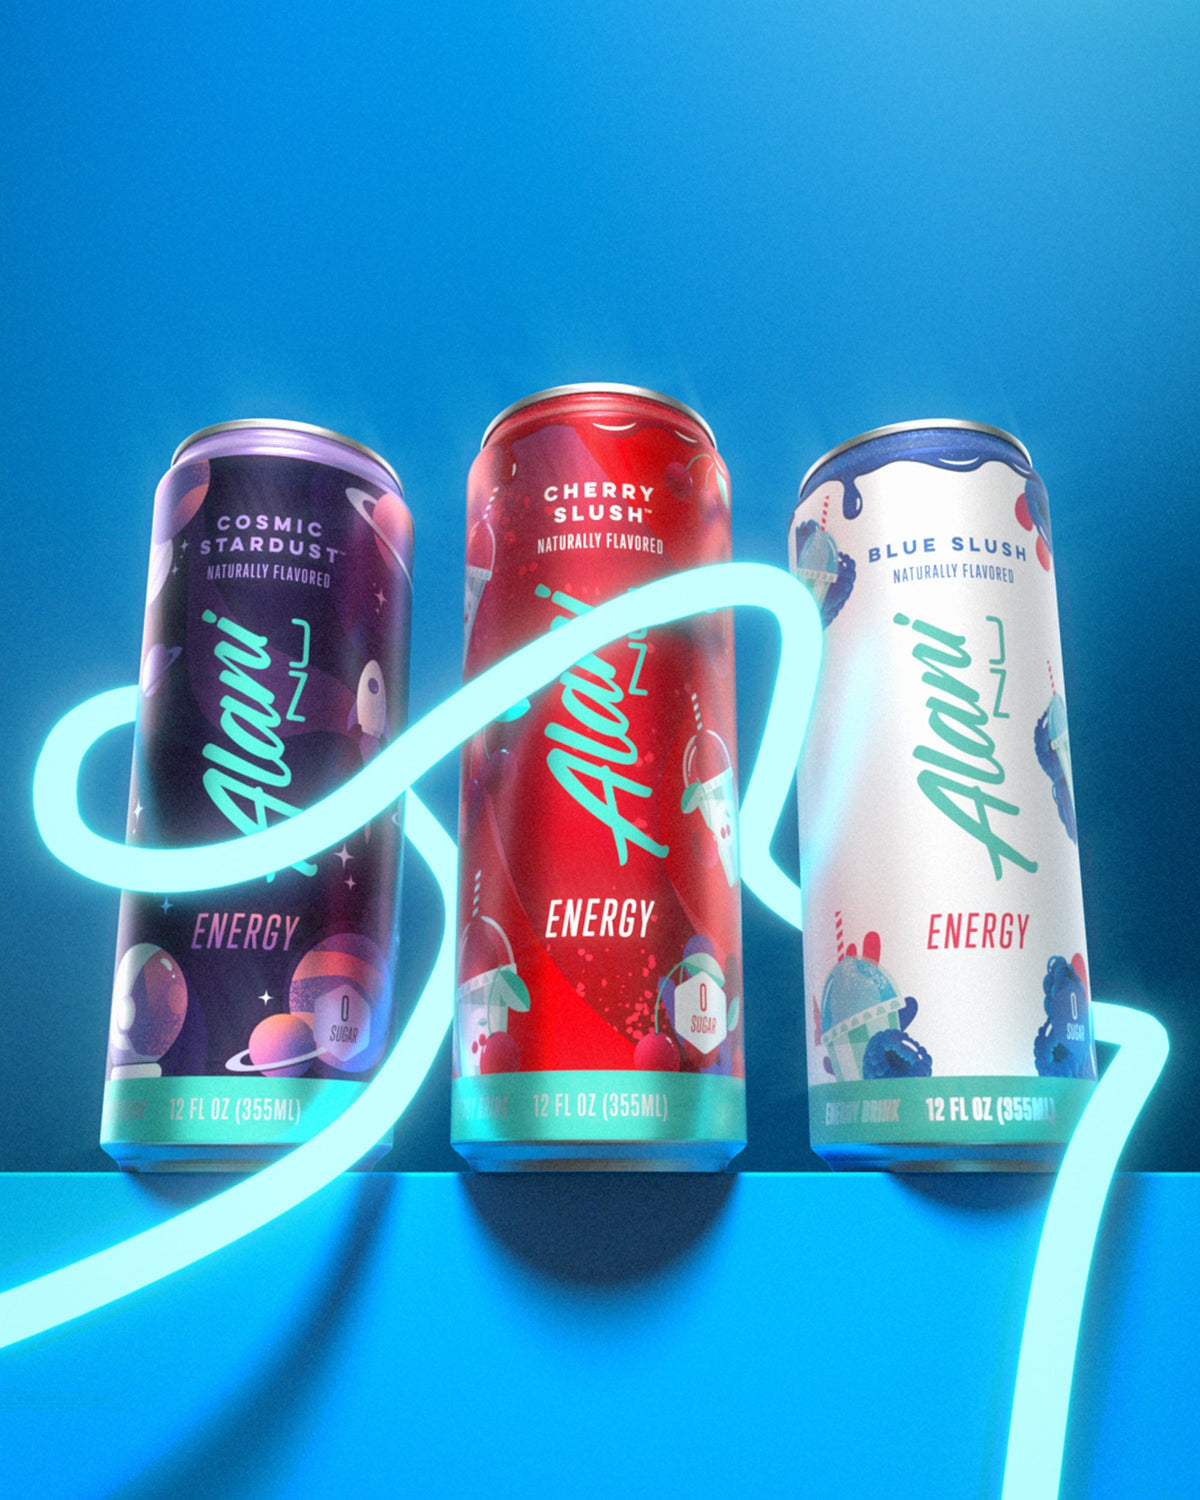 Energy drinks in Electric Energy flavors displayed along neon lights.